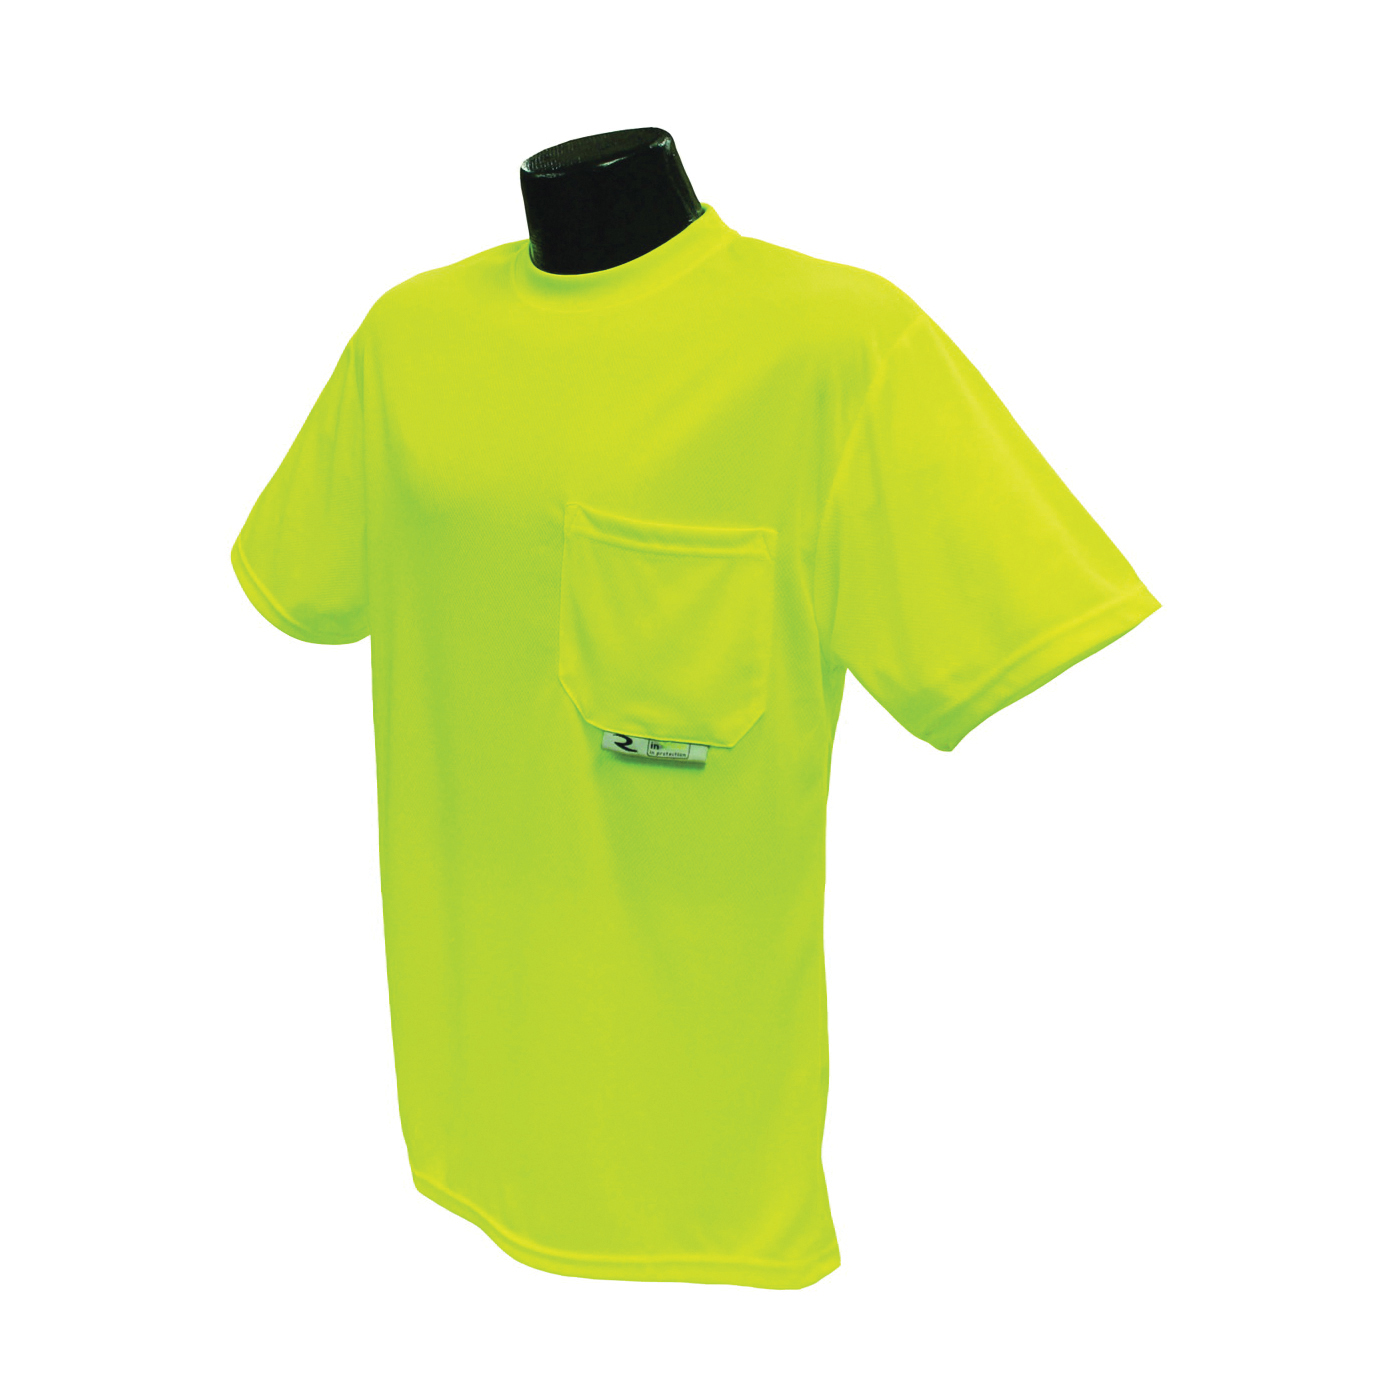 ST11-NPGS-L Safety T-Shirt, L, Polyester, Green, Short Sleeve, Pullover Closure